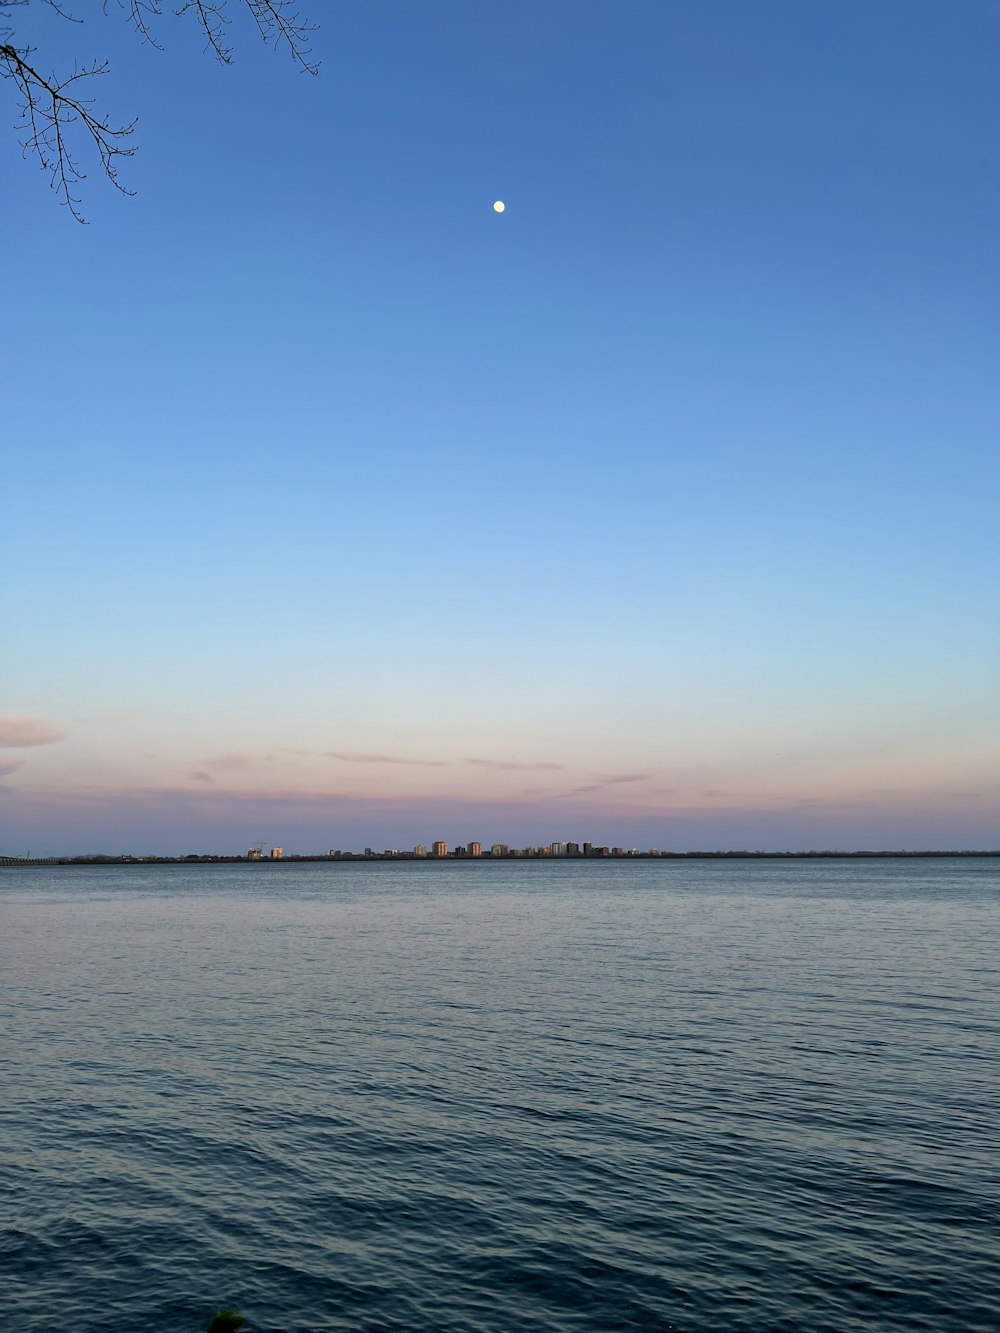 a large body of water with a moon in the sky